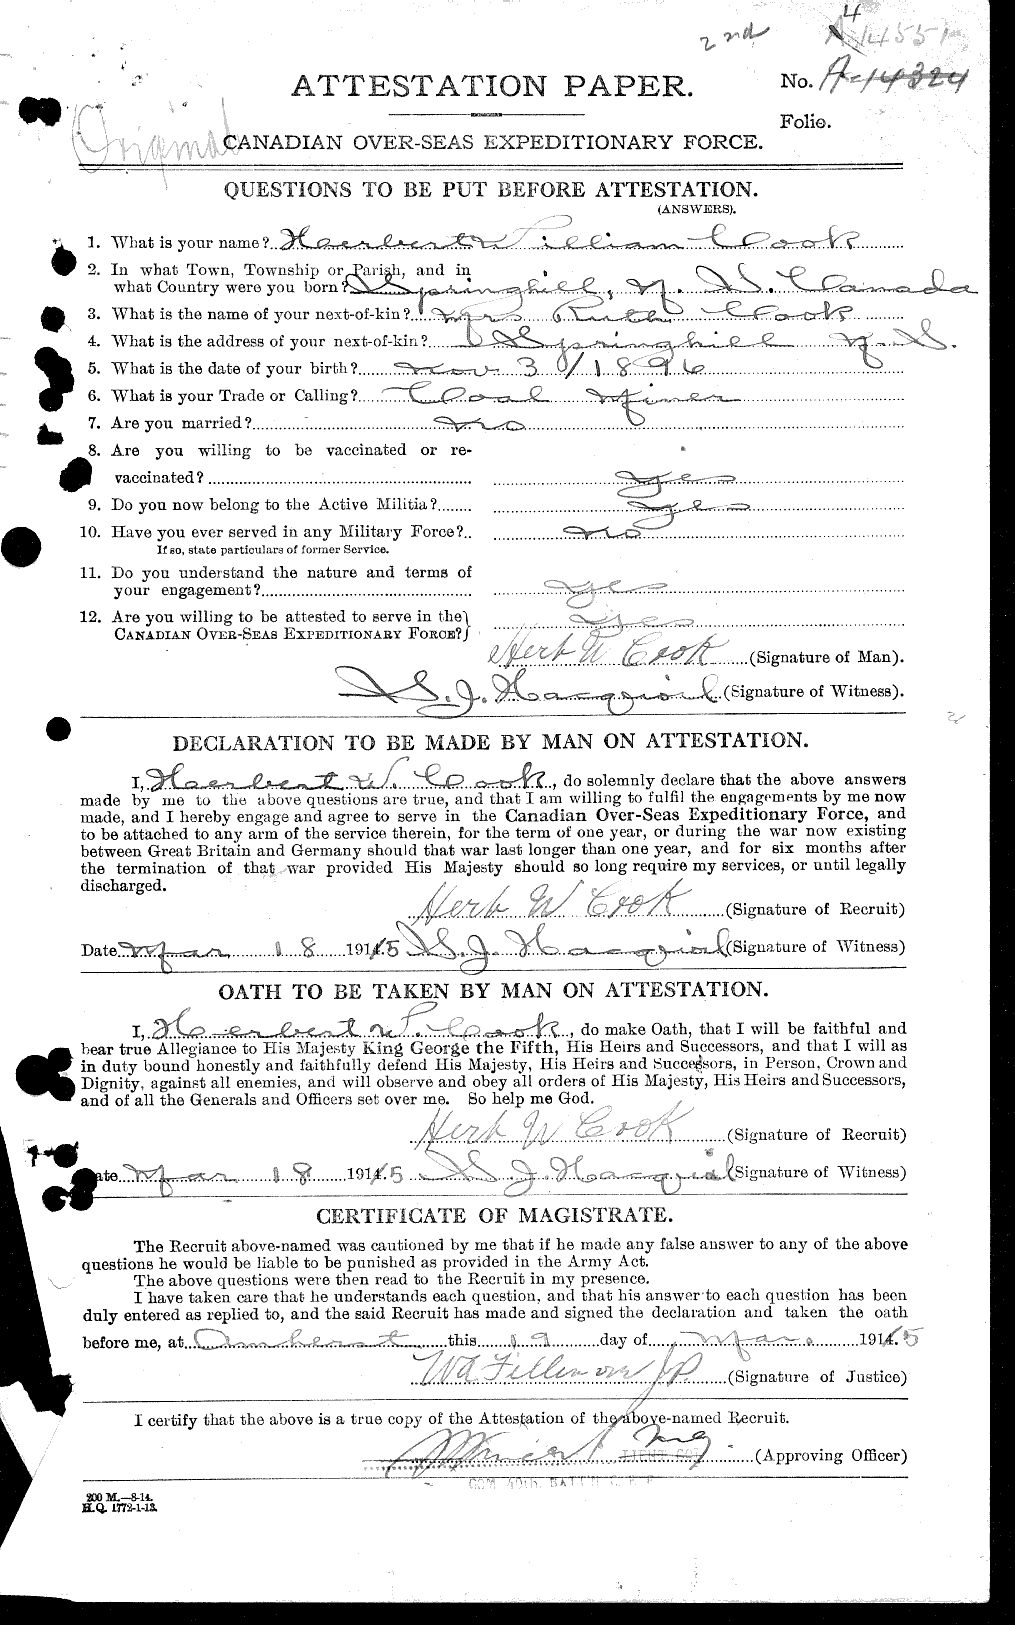 Personnel Records of the First World War - CEF 041487a